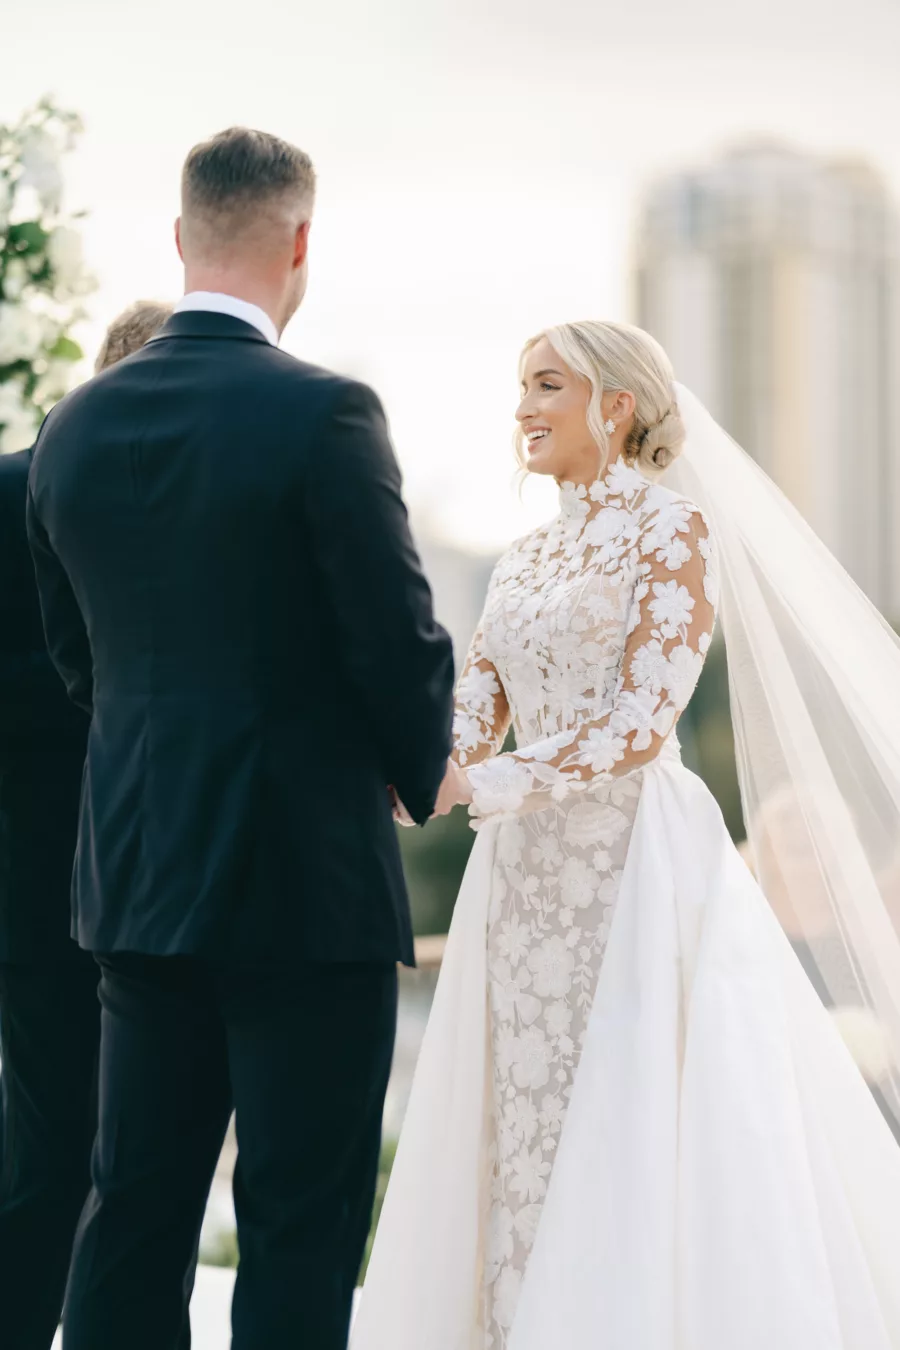 Romantic Bride and Groom Just Married Wedding Portrait | Long Sleeve Embroidered Flower Fit and Flare Anne Barge Solana Wedding Dress with Detachable Train Inspiration